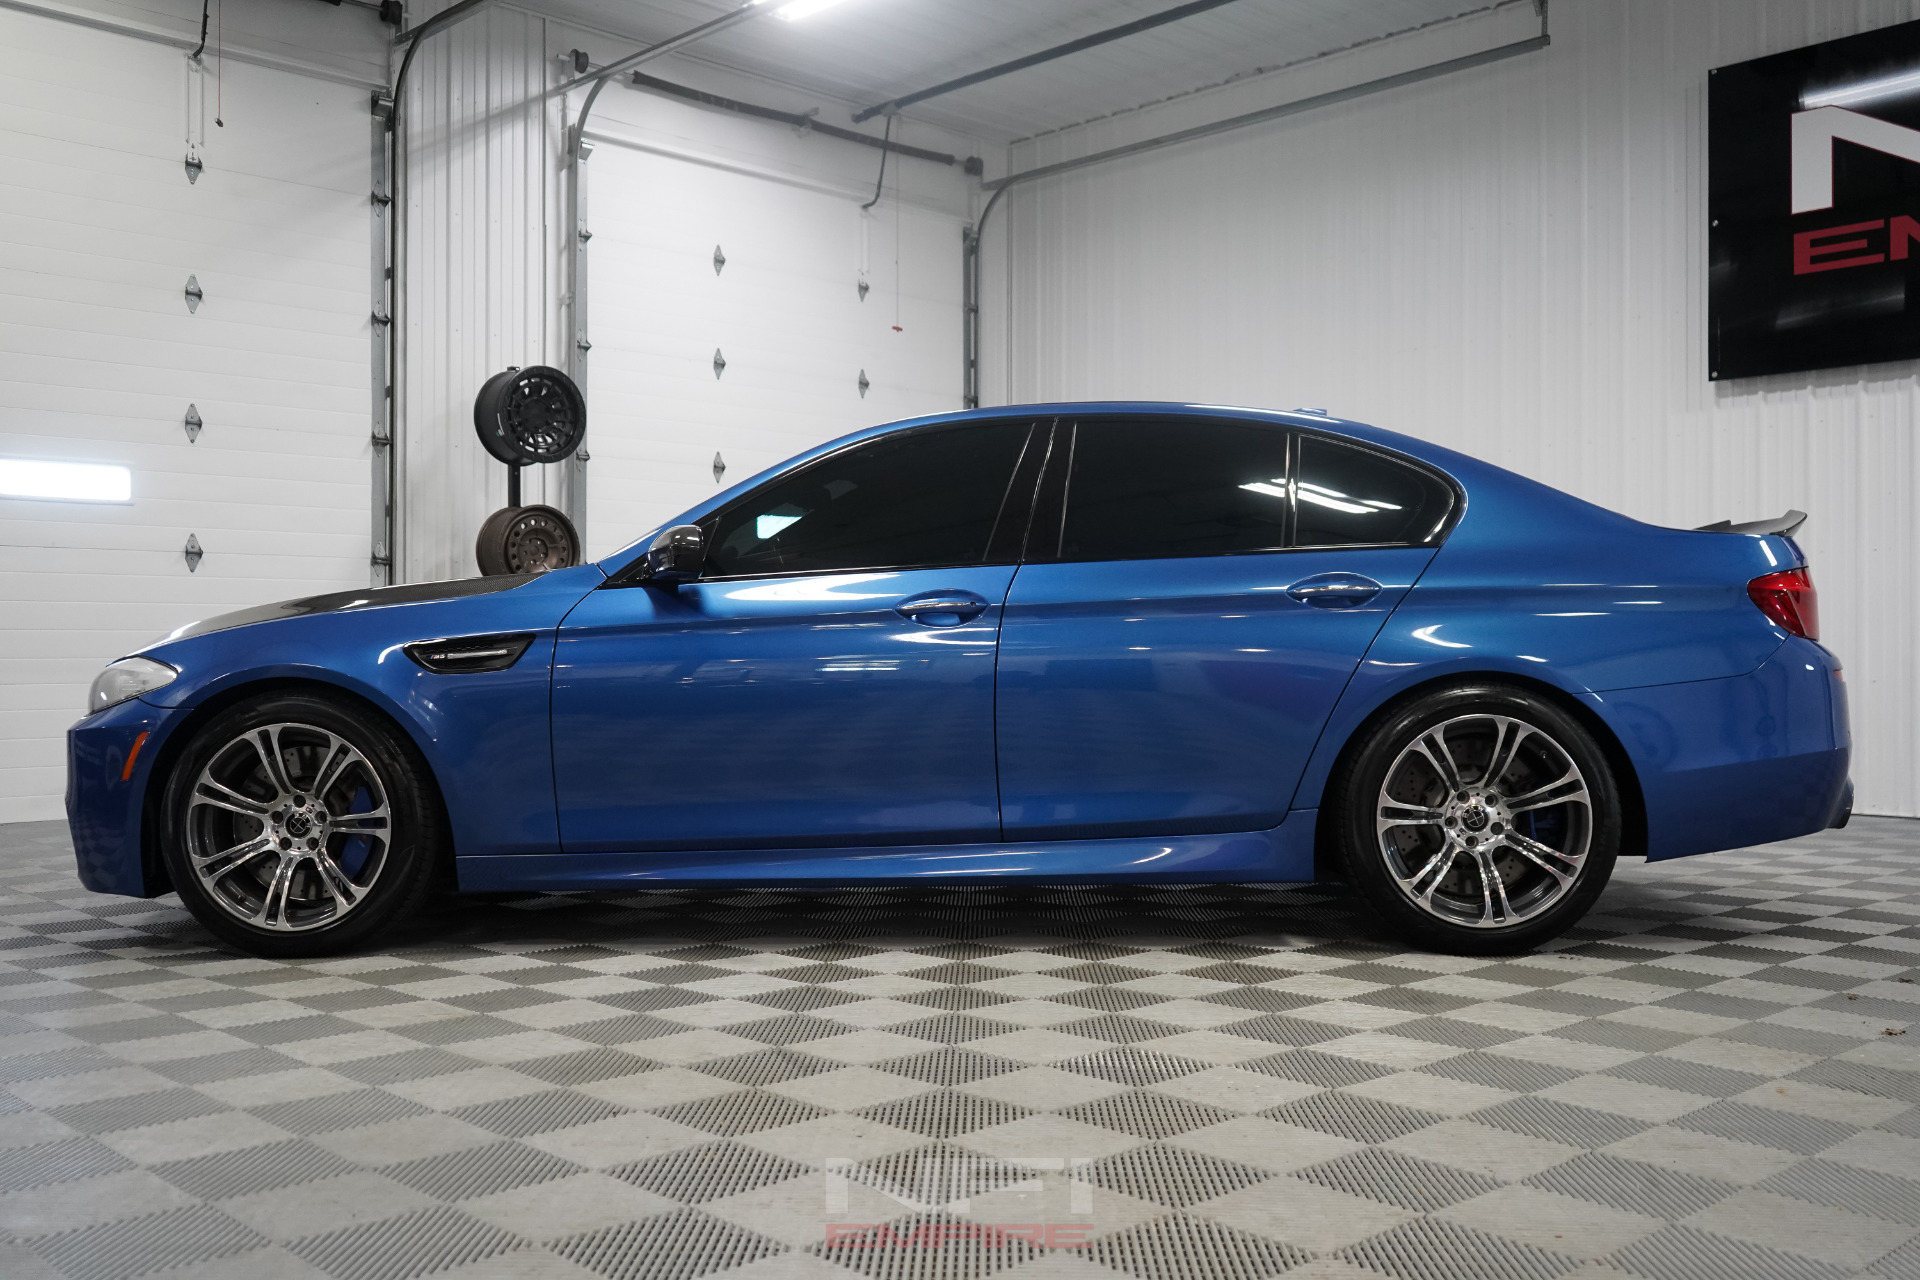 New and Used 2005 to 2006 BMW M5 For Sale